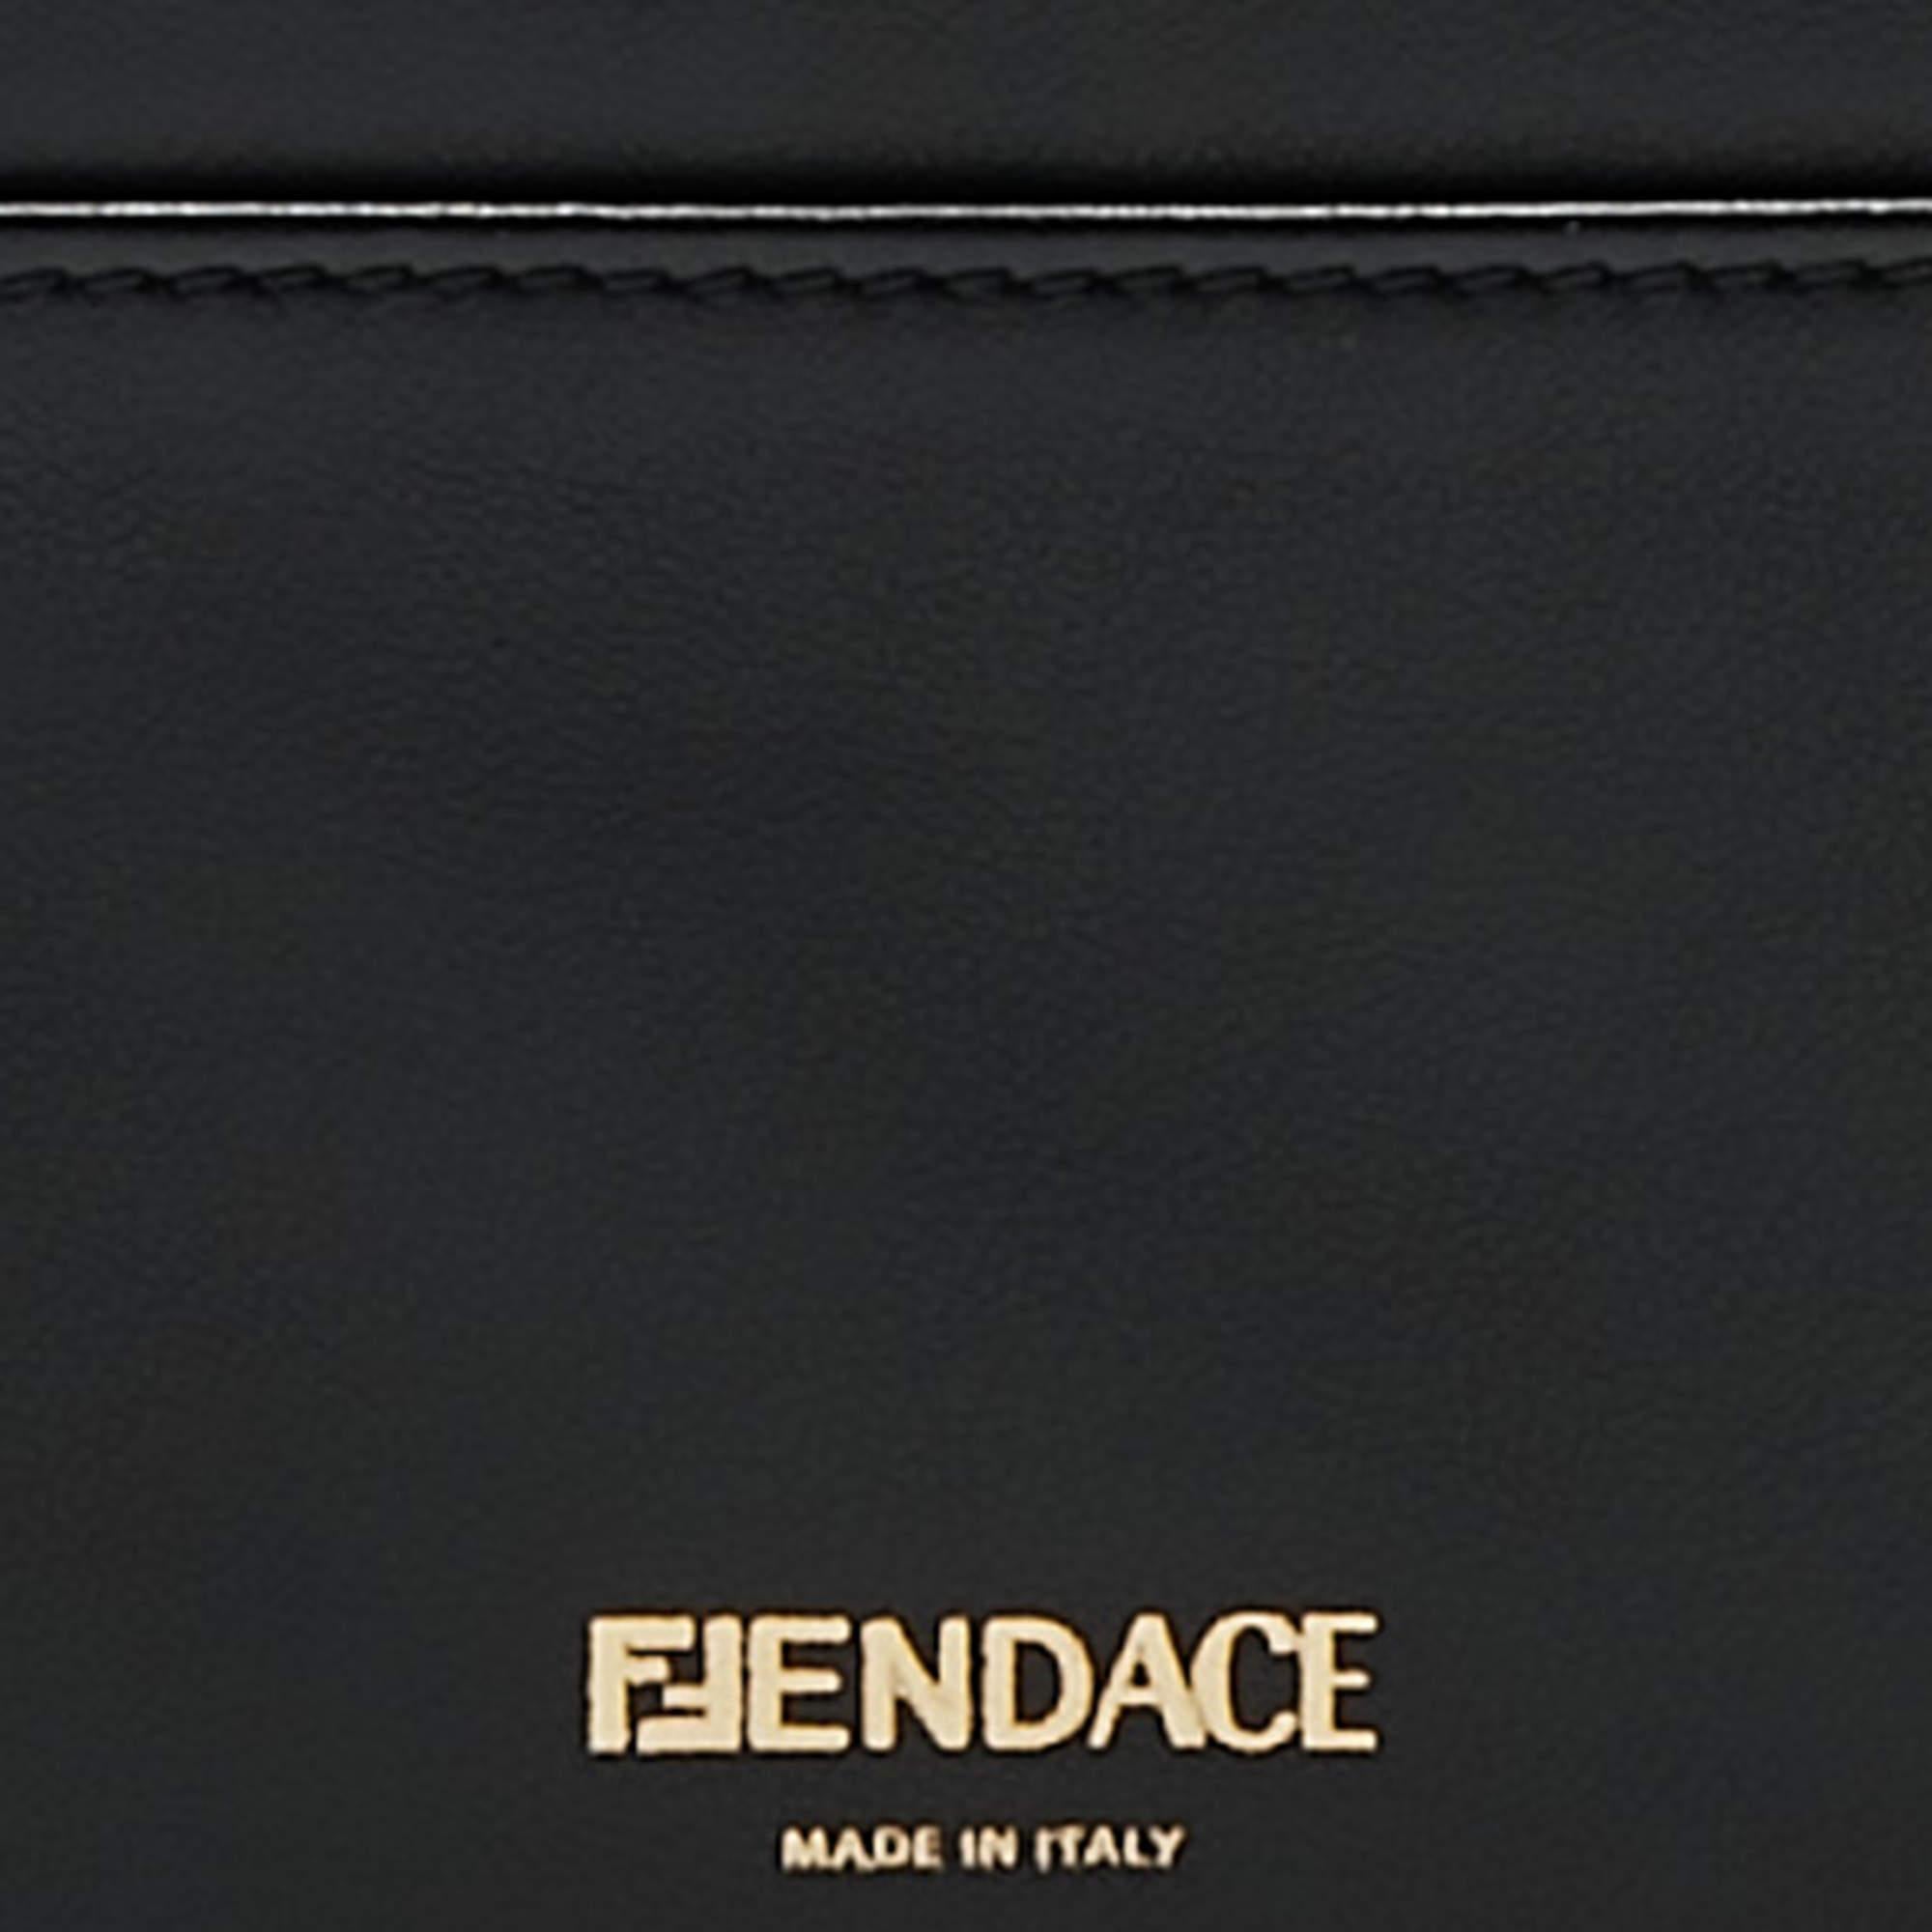 This luxurious Fendi x Versace Fendace lanyard boasts exquisite black and gold leather craftsmanship, marrying Fendi's timeless elegance with Versace's opulent flair. It features sleek lines, a convenient lanyard, and ample card storage, embodying